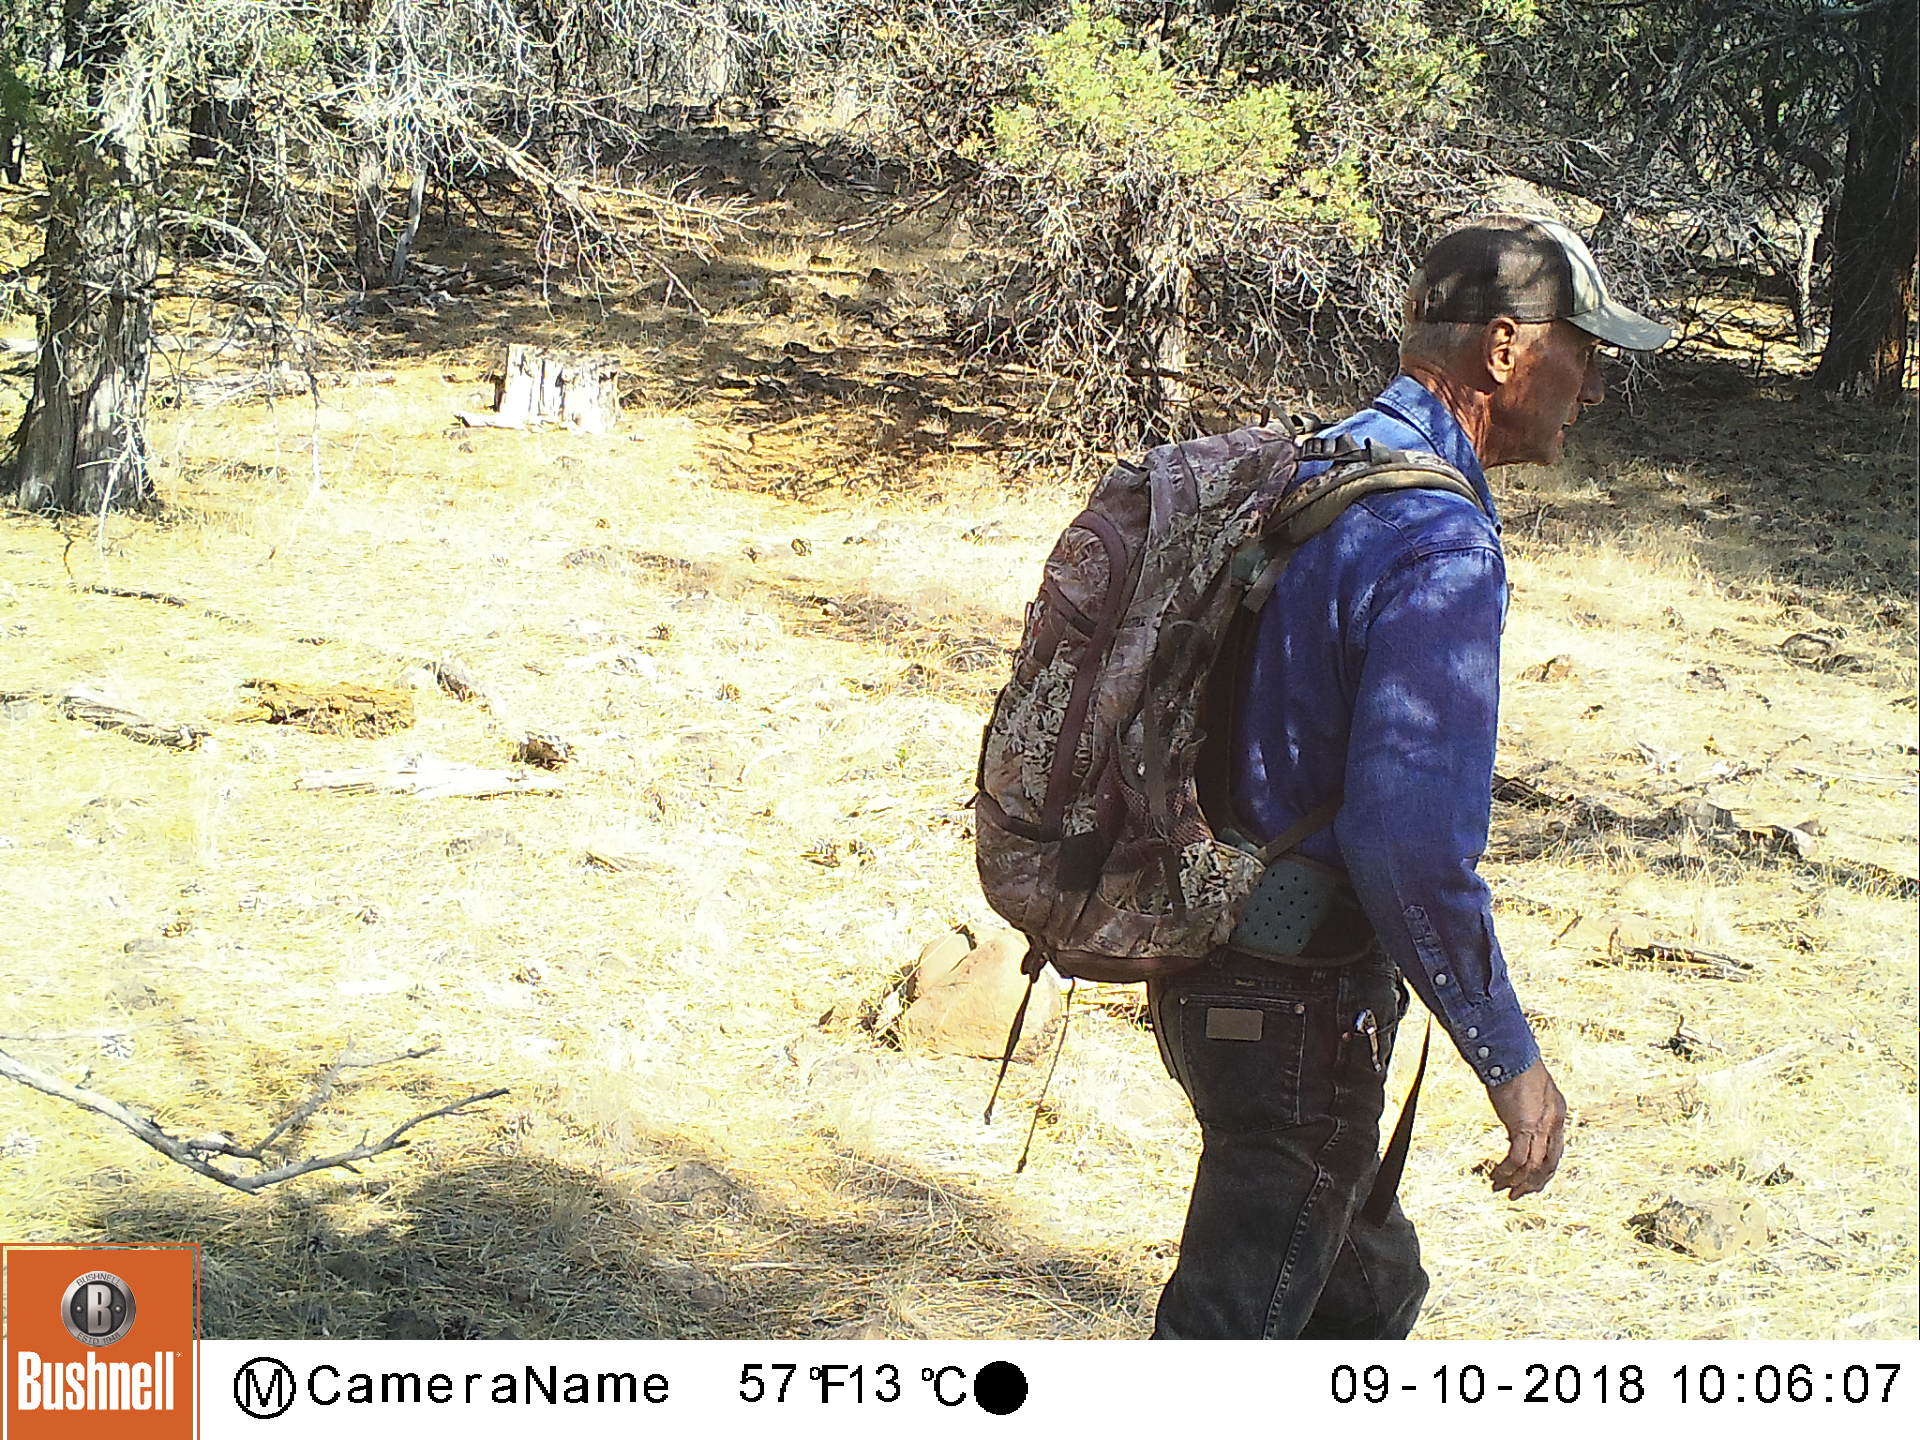 Patrick hiking by triggers a trail camera